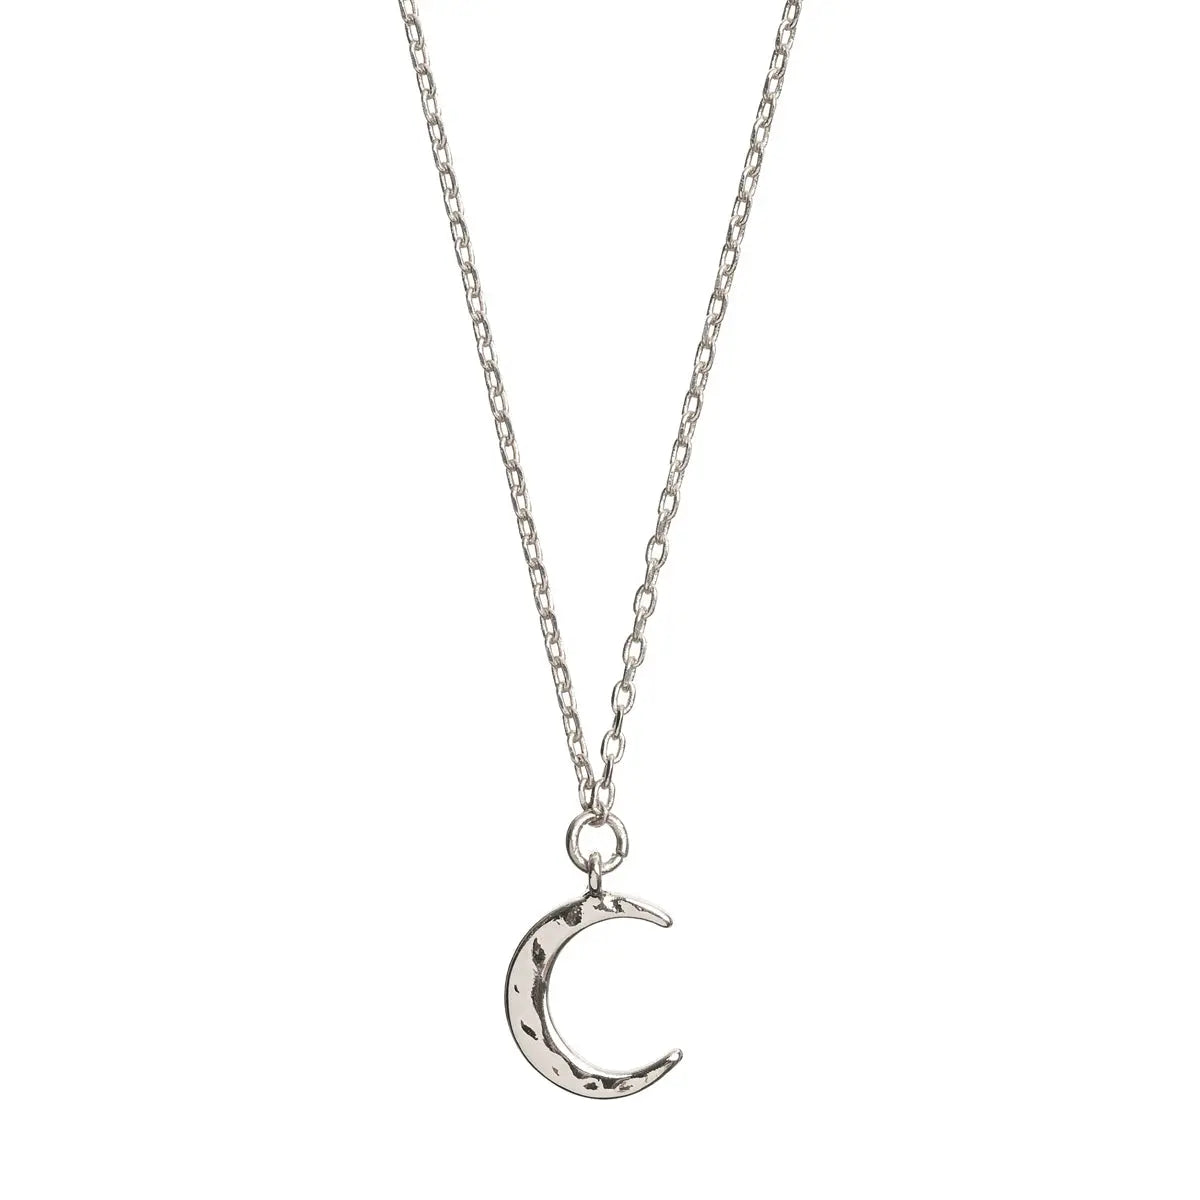 Hammered moon necklace Silver